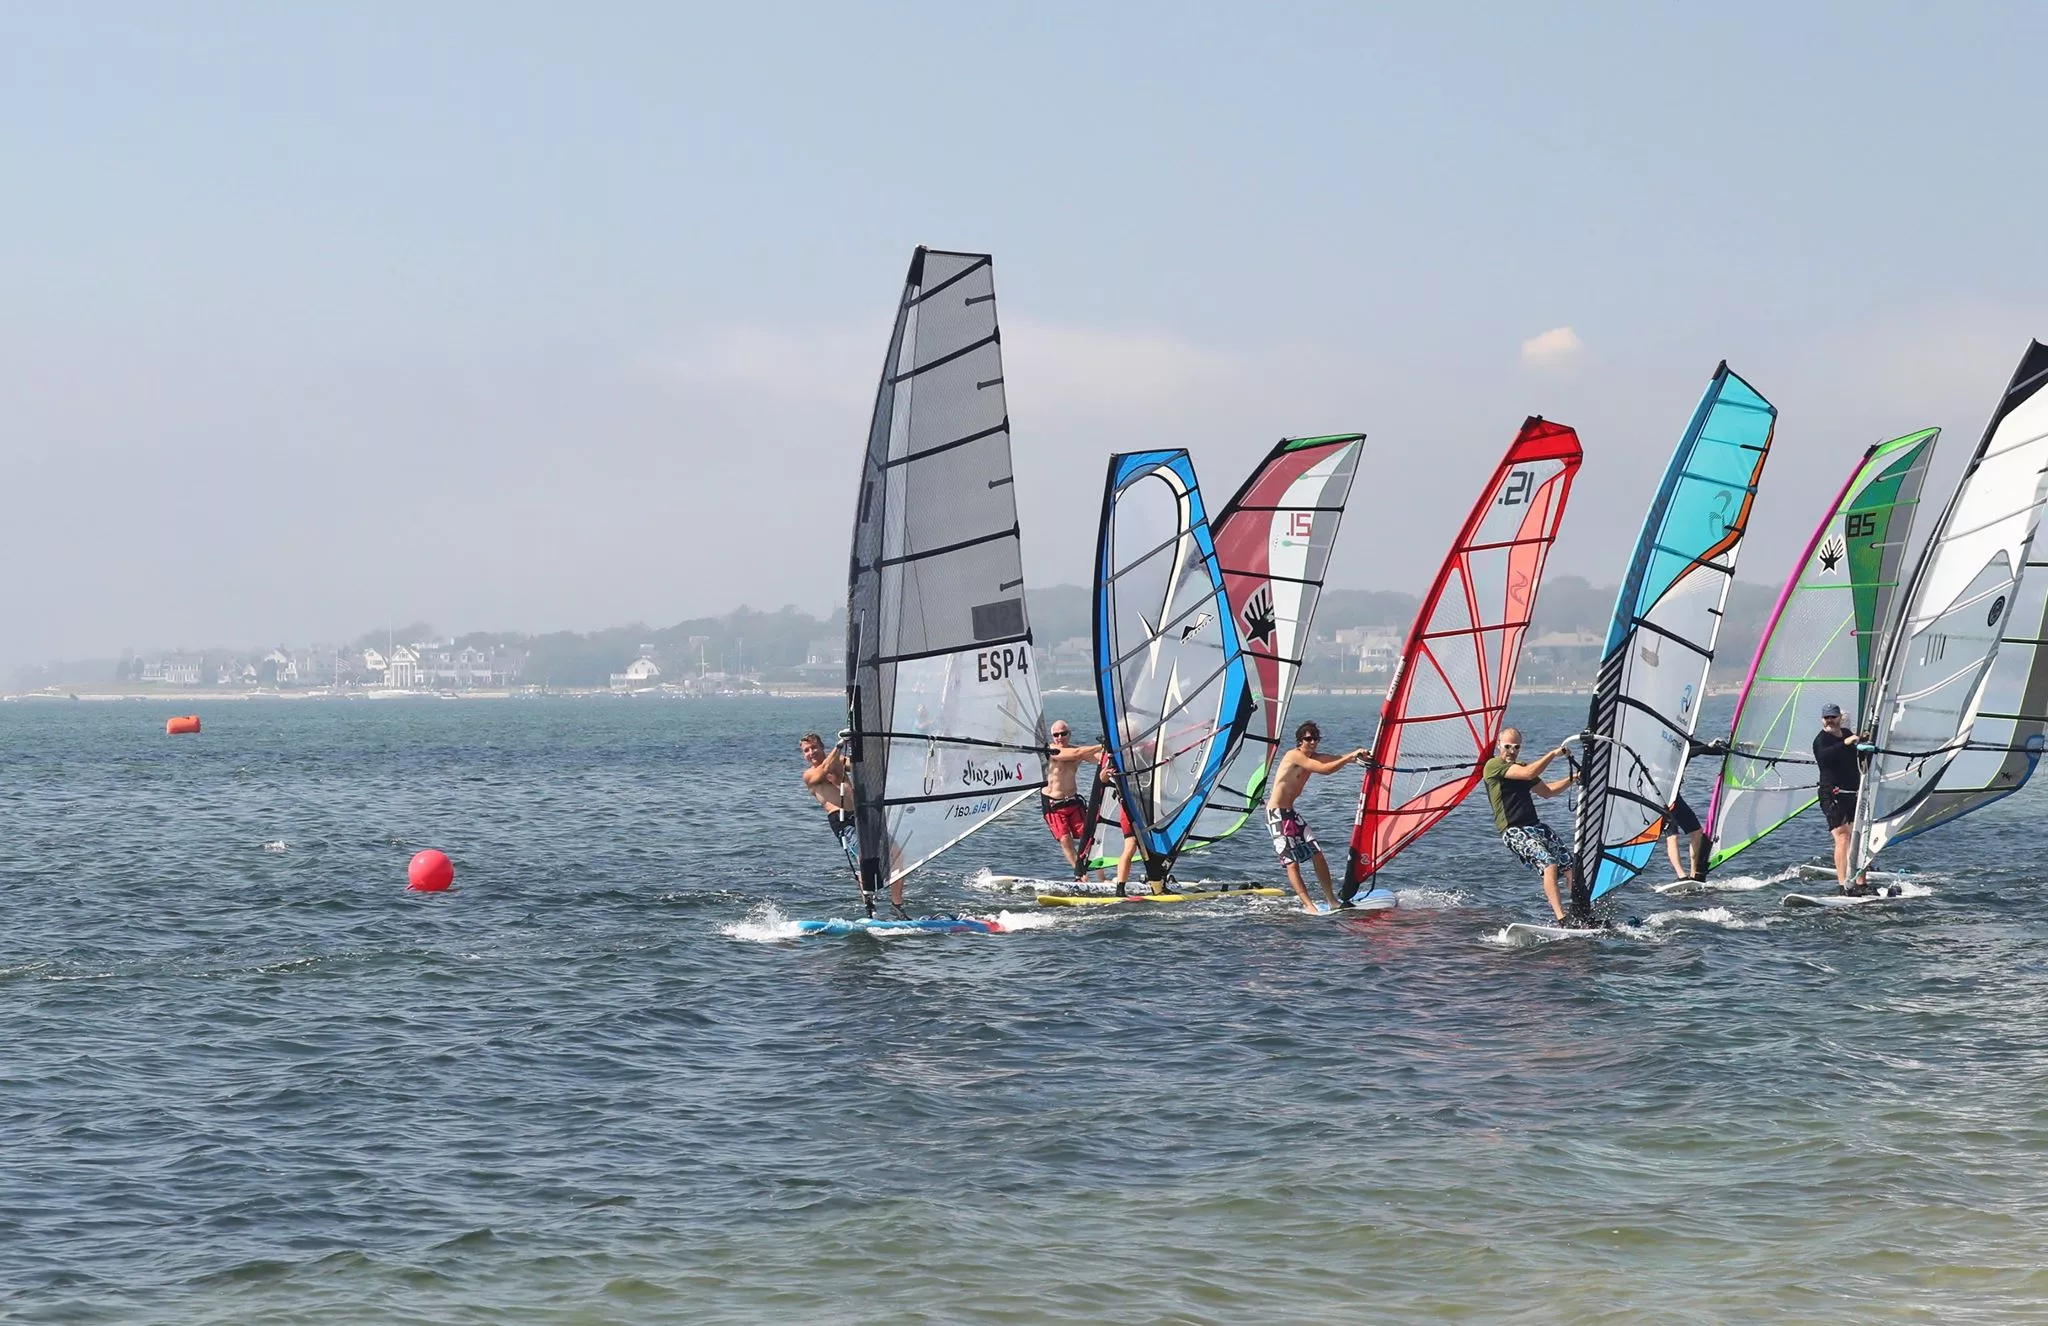 Cape Cod Windsurfing in USA, North America | Windsurfing - Rated 0.9